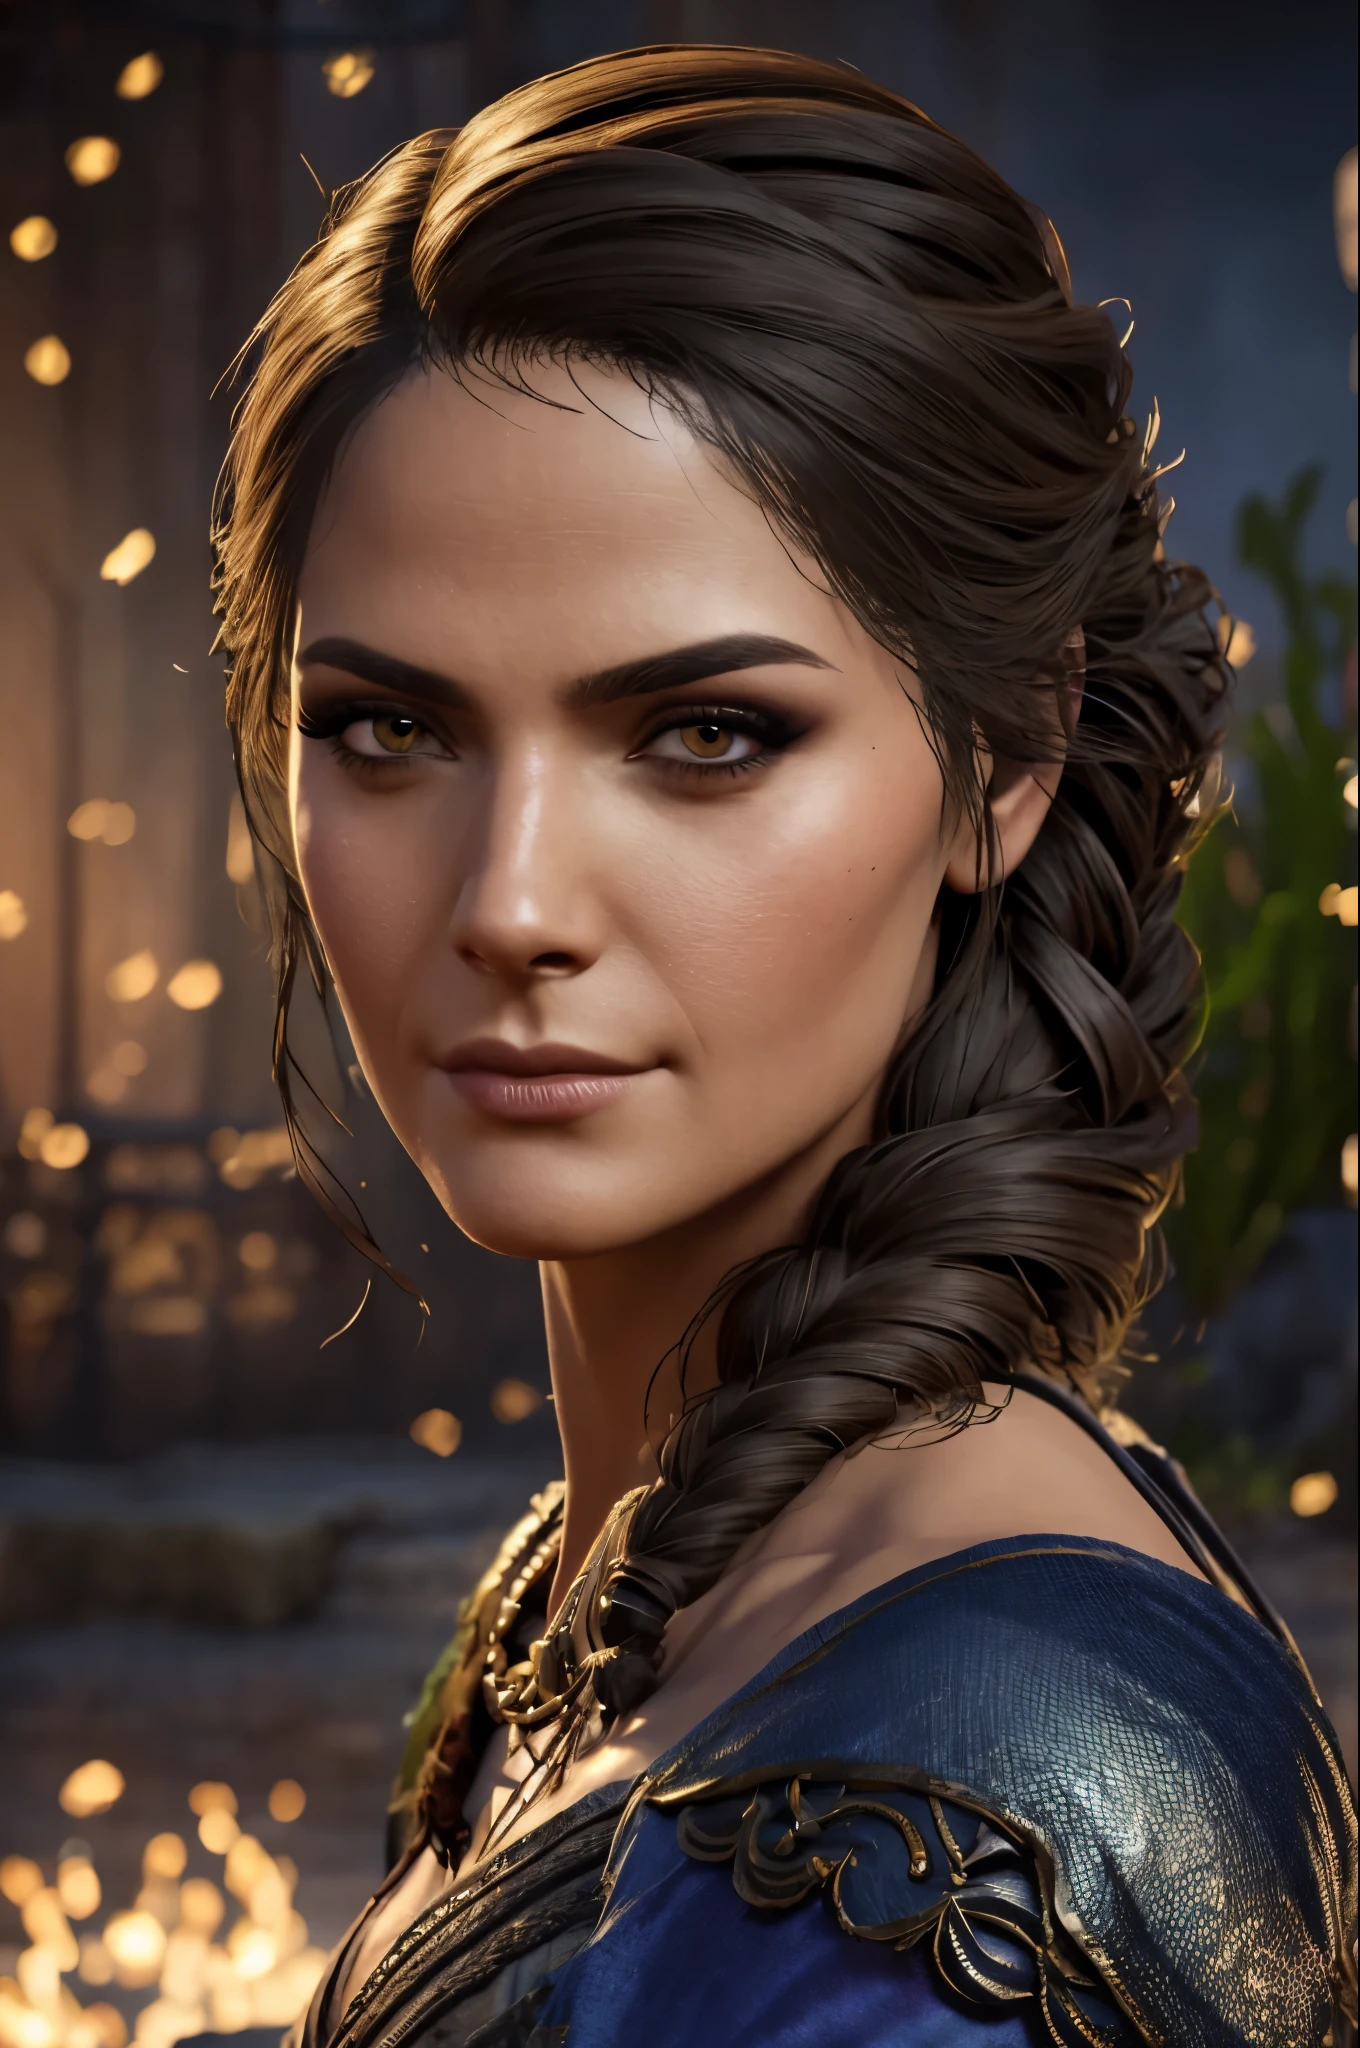 (best quality,ultra-detailed,realistic:1.37),(HDR,UHD,studio lighting),(portraits),(vivid colors),(warm color tones),(soft,moody lighting),(sharp focus),(bokeh),Kassandra,Assassin's Creed Universe,Kassandra's stunning face,Kassandra's piercing eyes,Kassandra's alluring gaze,Kassandra's seductive lips,Kassandra's flowing hair,Kassandra's confident and provocative smile,mysterious atmosphere,dark and gritty background,tattoos on Kassandra's body,ornate assassin gear,fierce and powerful stance,sparkling jewelry,dramatic lighting to accentuate facial features,subtle makeup,subtle hints of smoke or mist,nighttime setting,embers glowing in the background,subtle moonlight bathing the scene